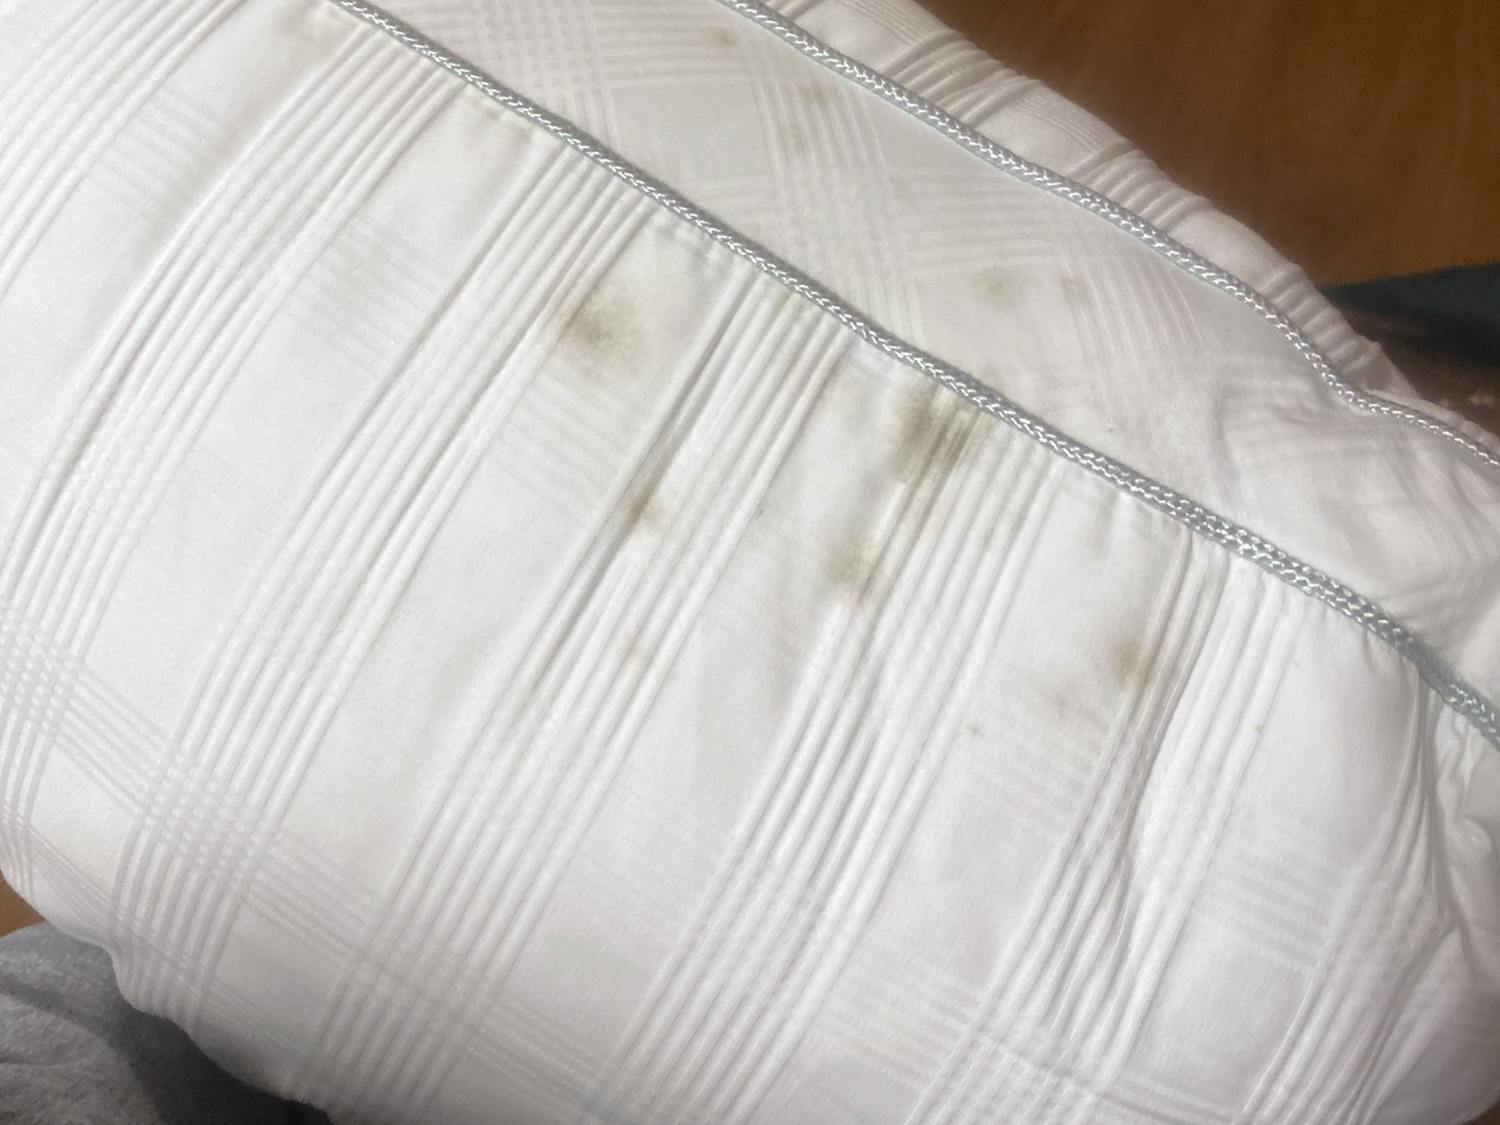 A mold-stained pillow after being dry-cleaned in January 2021. Fourth-year public health student Kendall Guthrie found the mold in her room at Capstone when returning to campus after winter break.